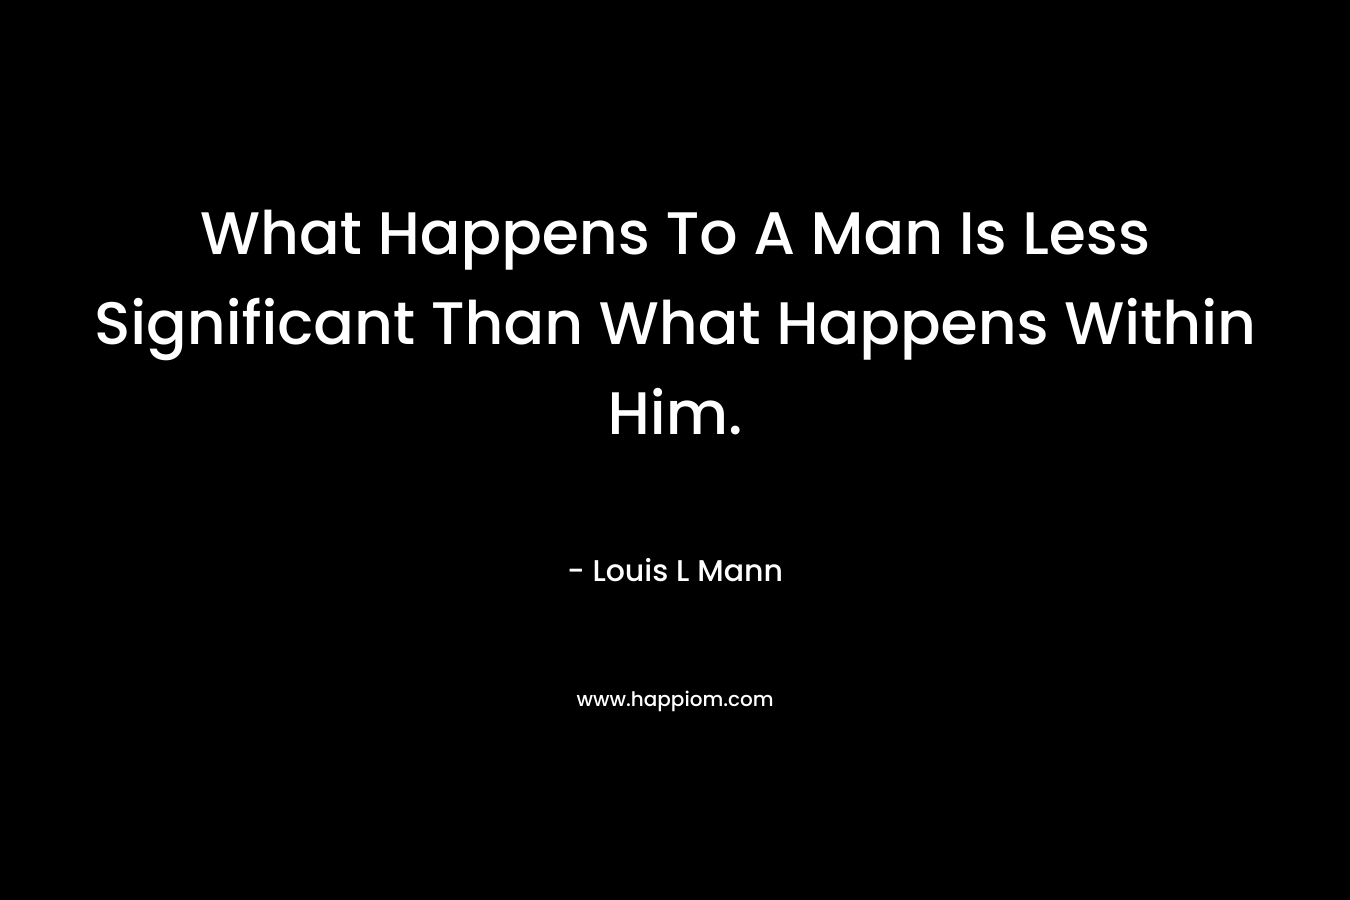 What Happens To A Man Is Less Significant Than What Happens Within Him.